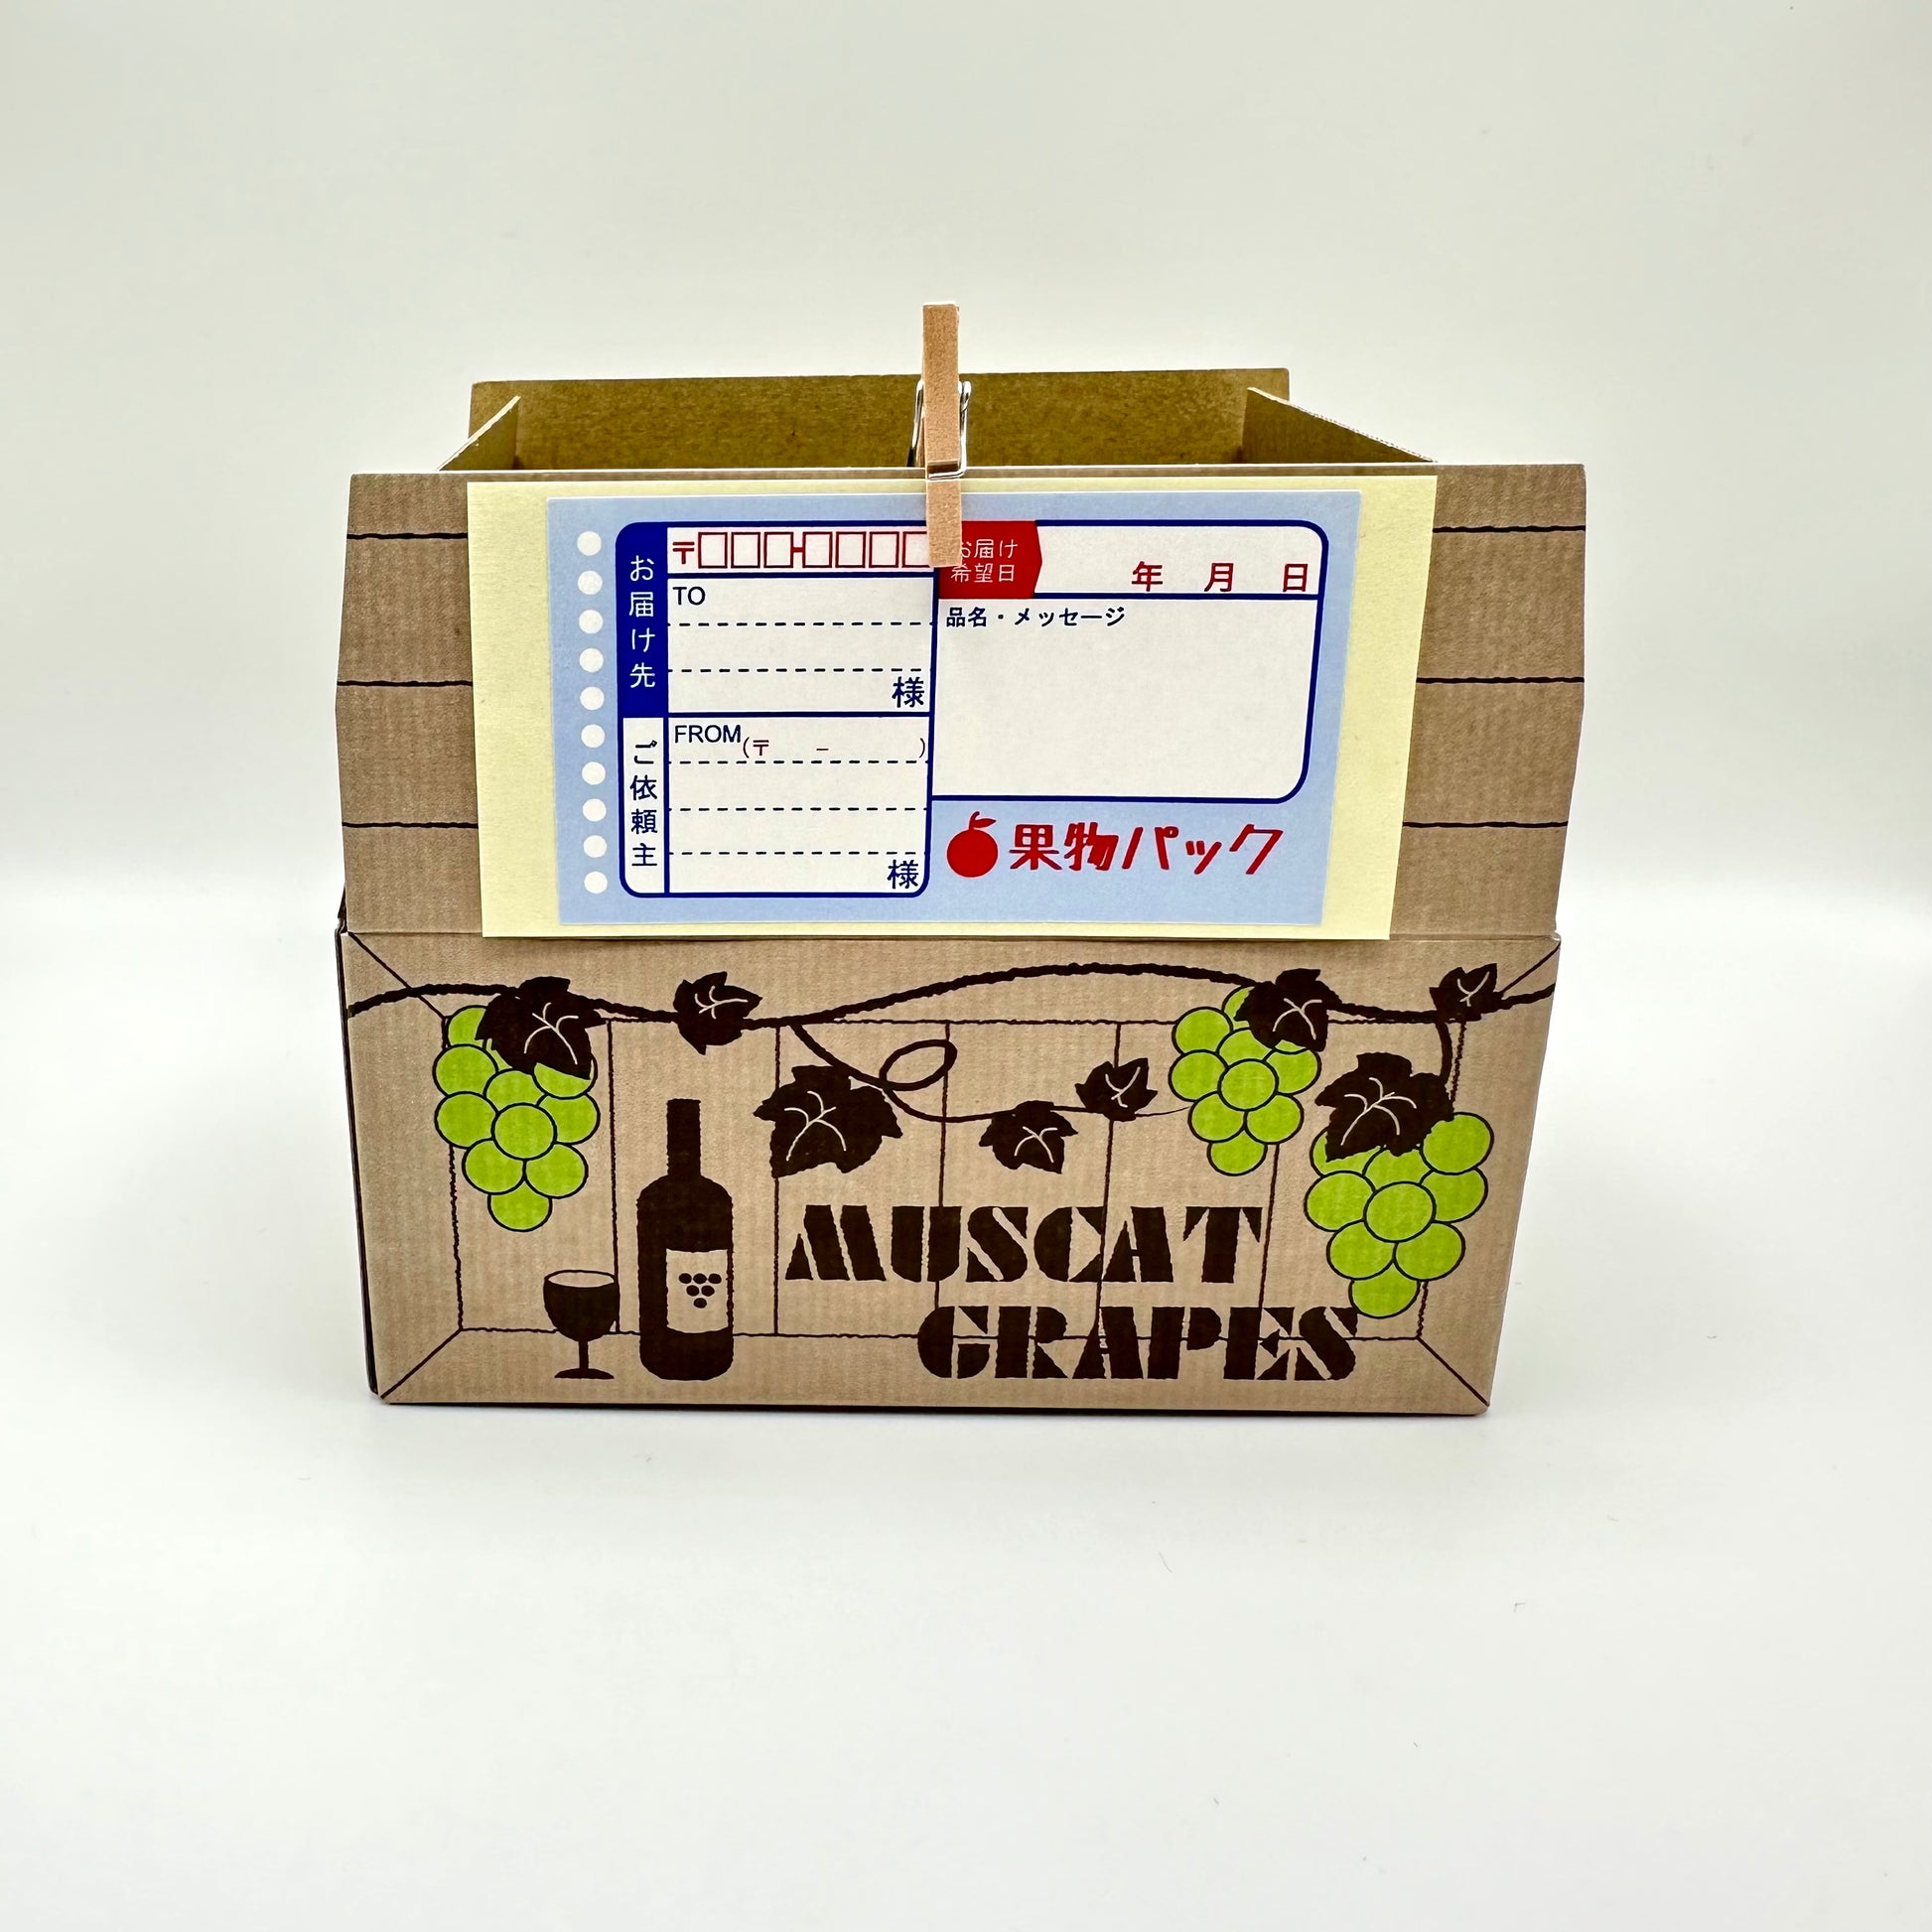 Muscat grapes gift box with to/from shipping label in Japanese.